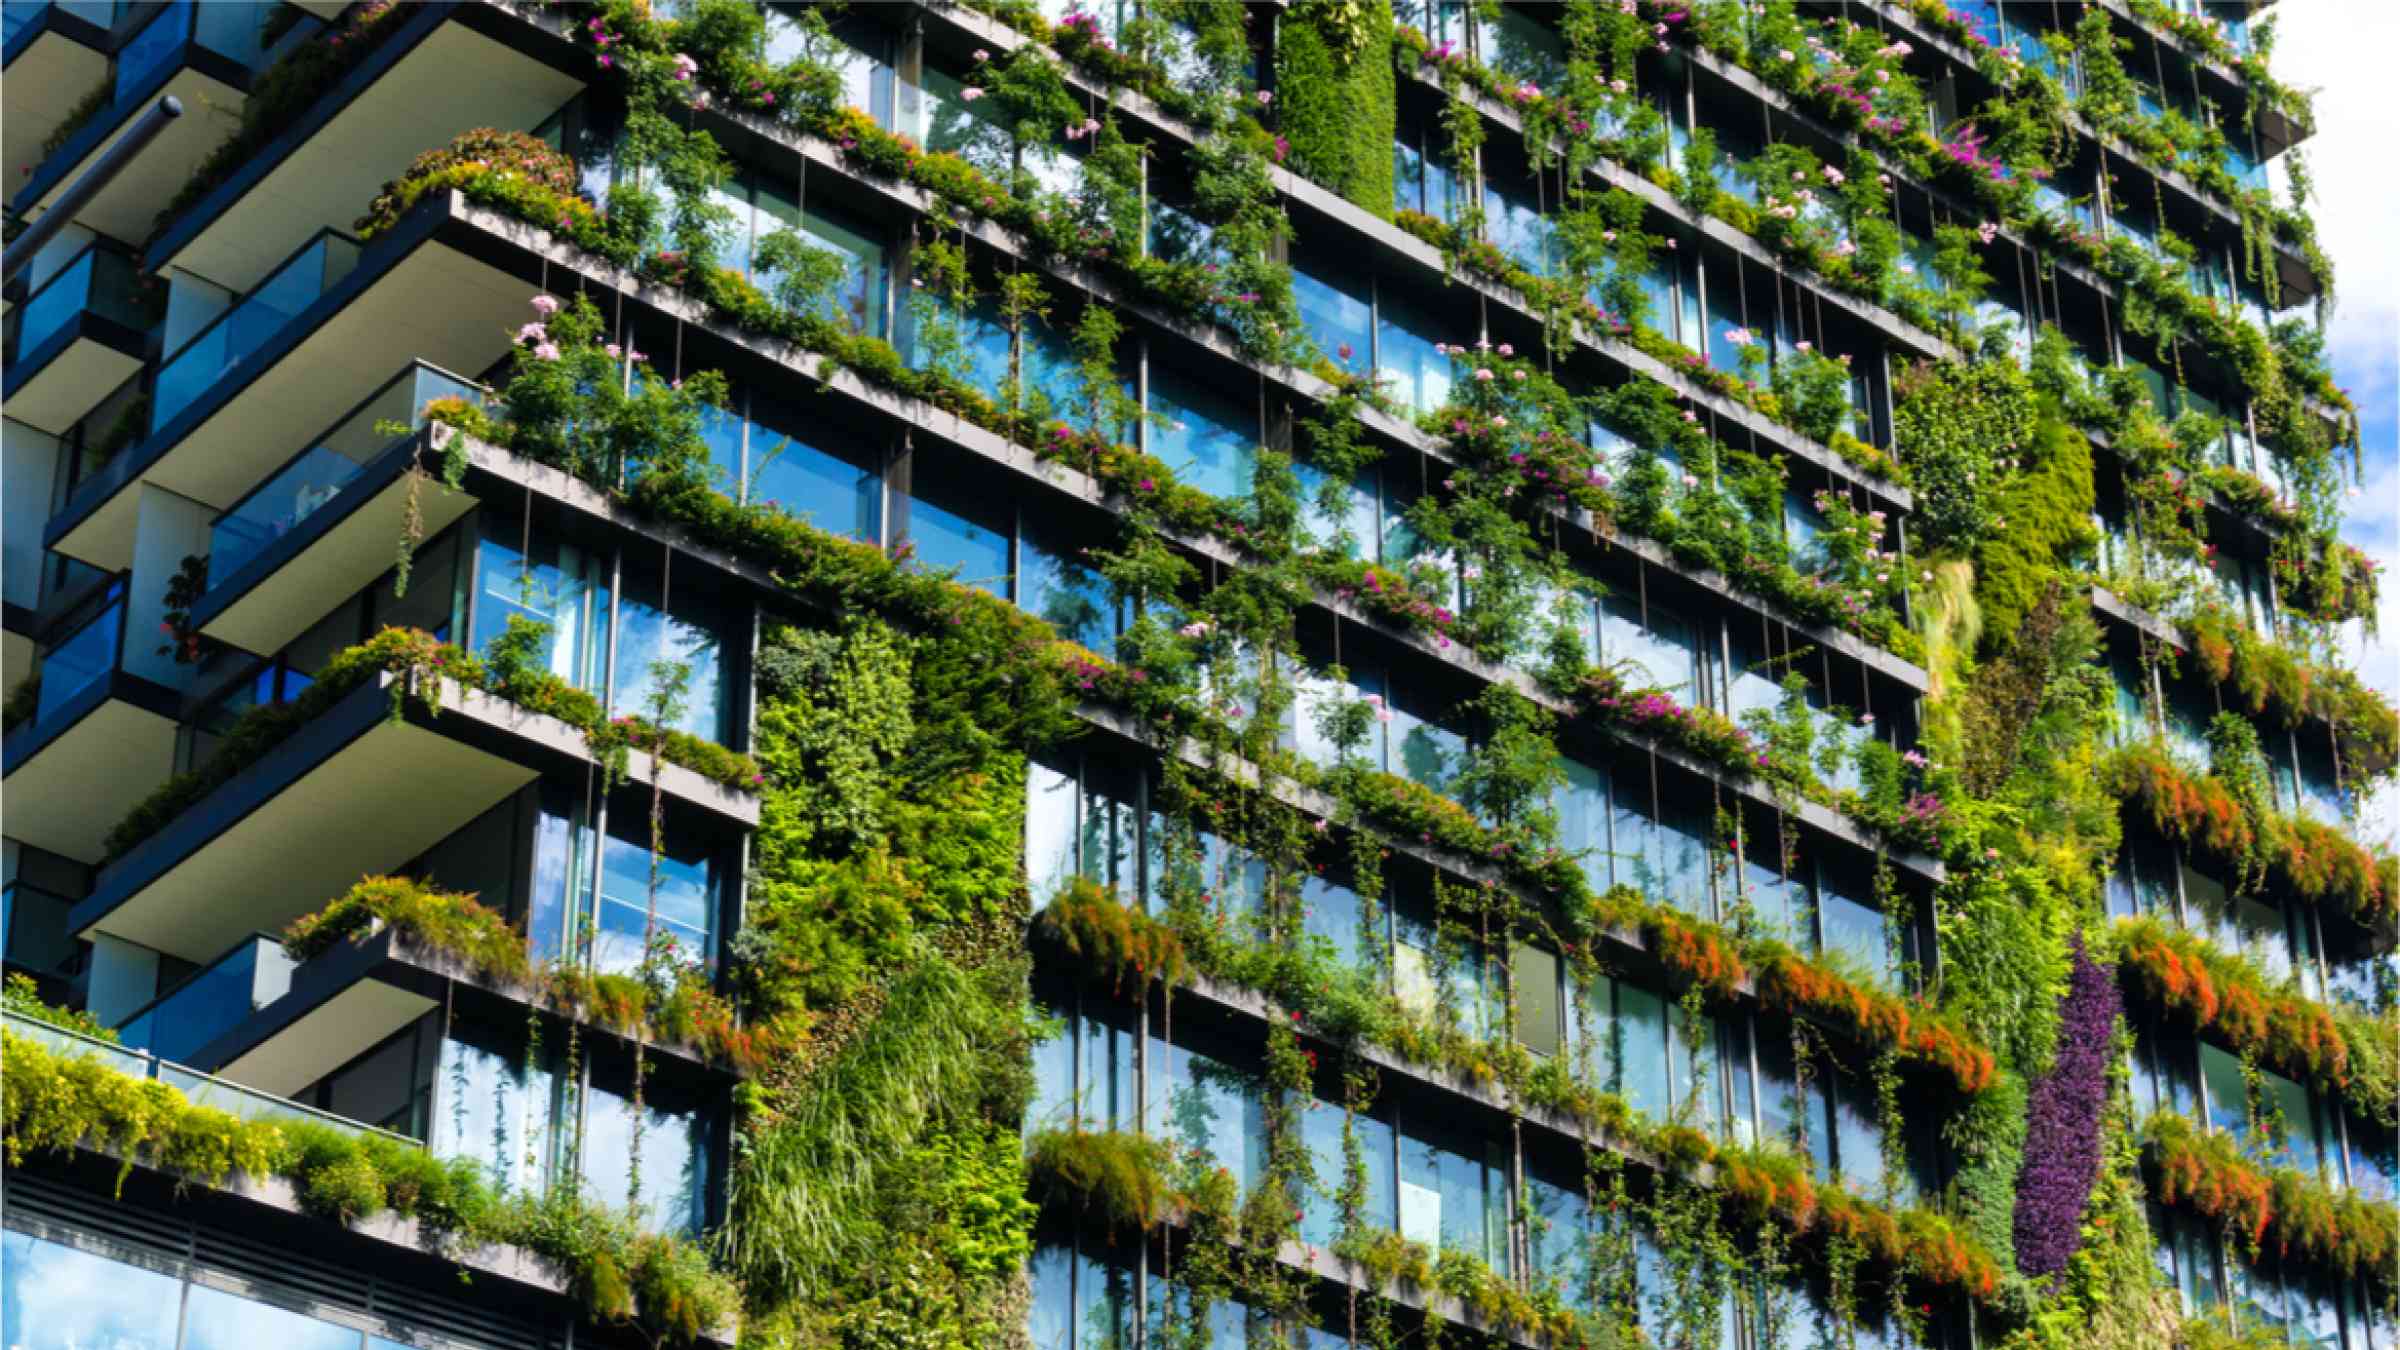 Green skyscraper building with plants growing on the facade. Ecology and green living in city, urban environment concept.